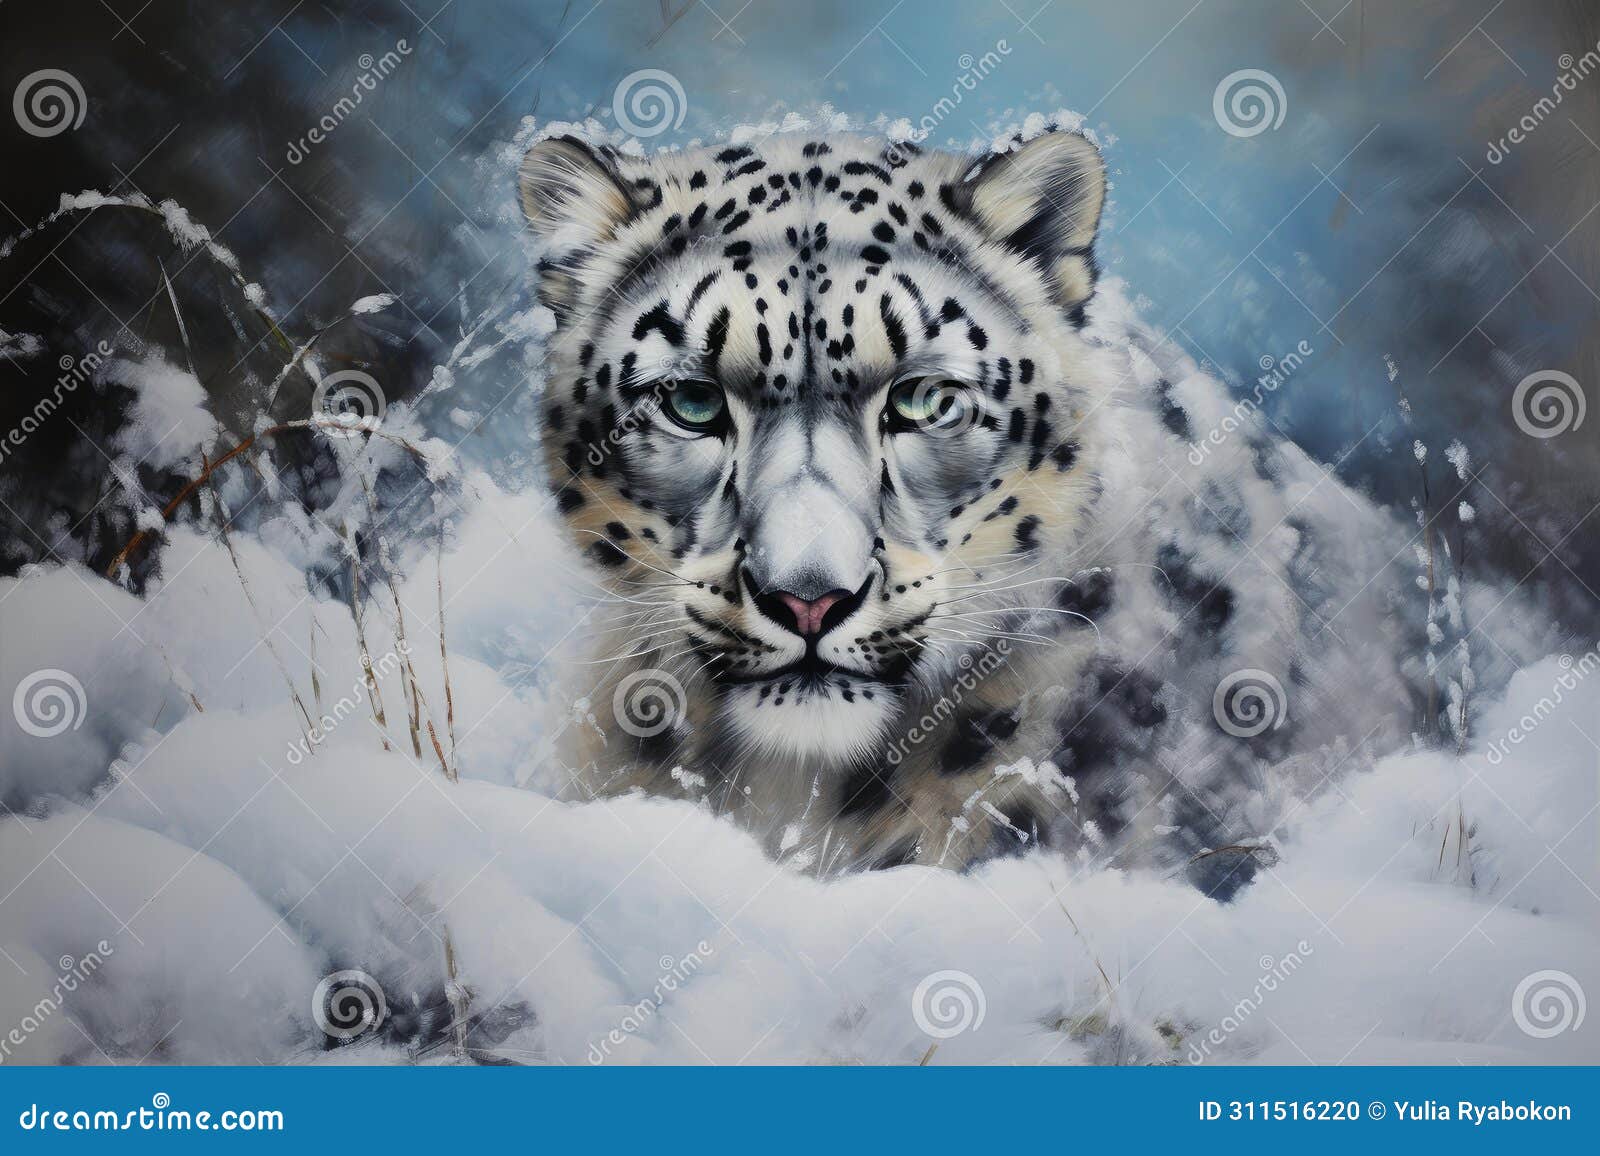 stealthy snow leopard. generate ai